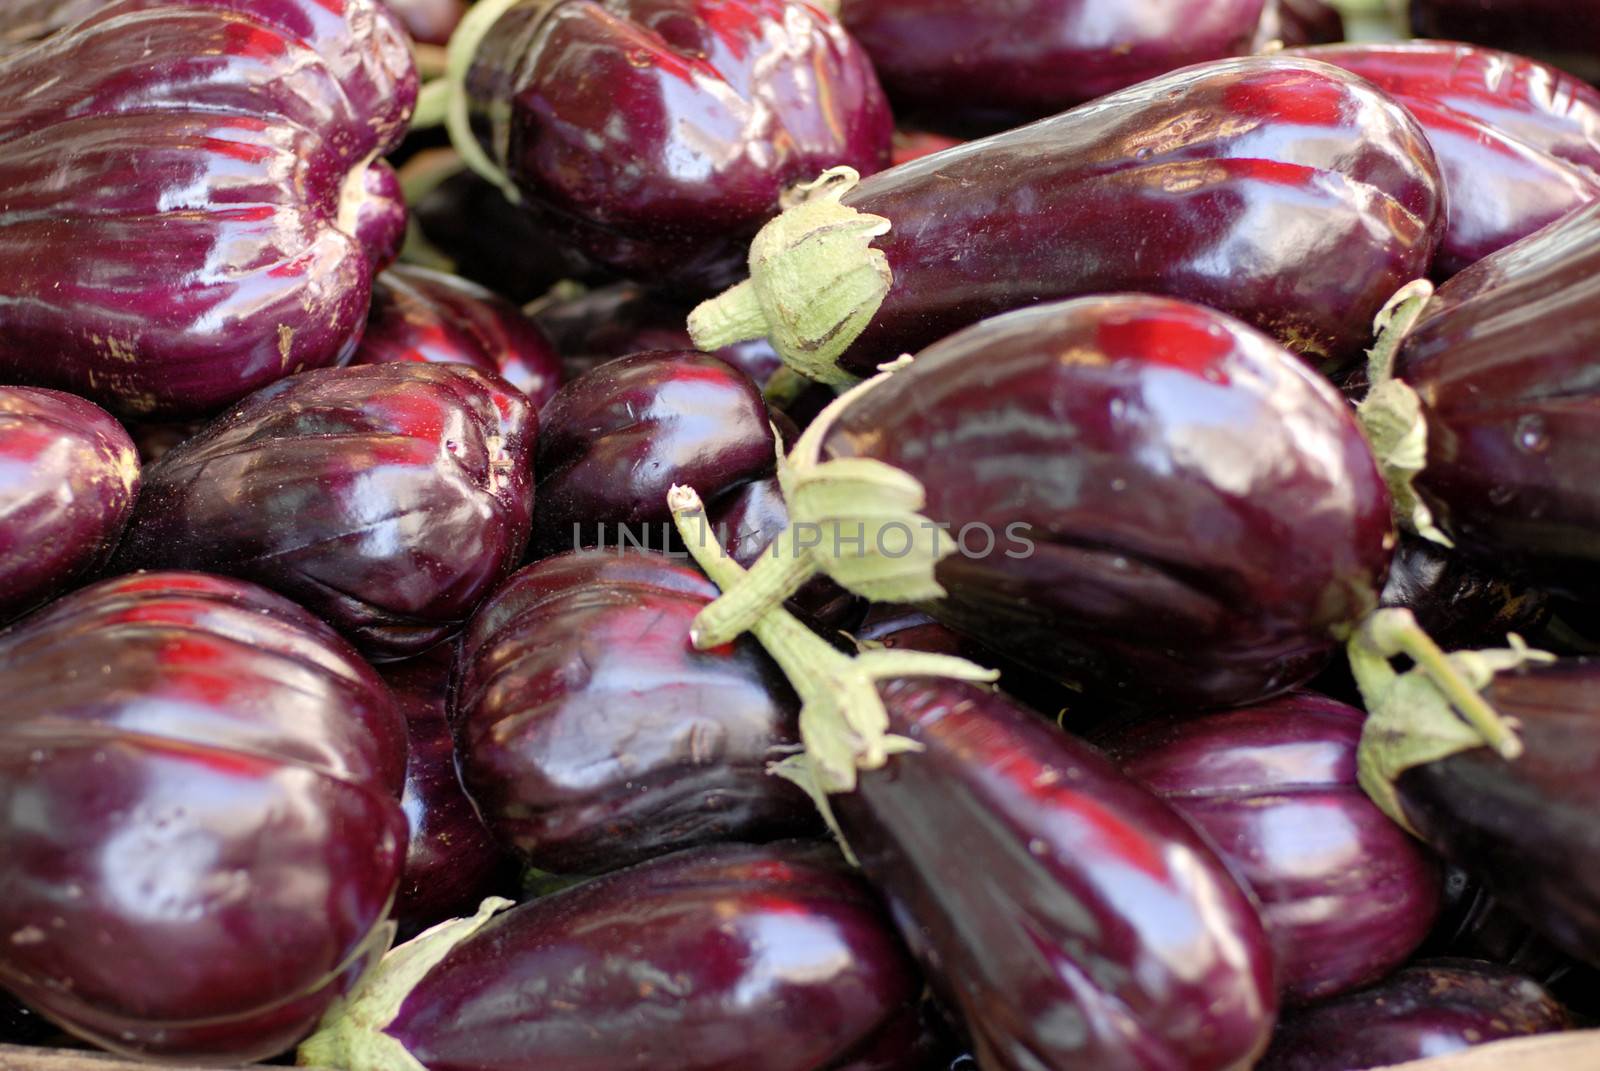 Eggplants at a market stall by stockyimages